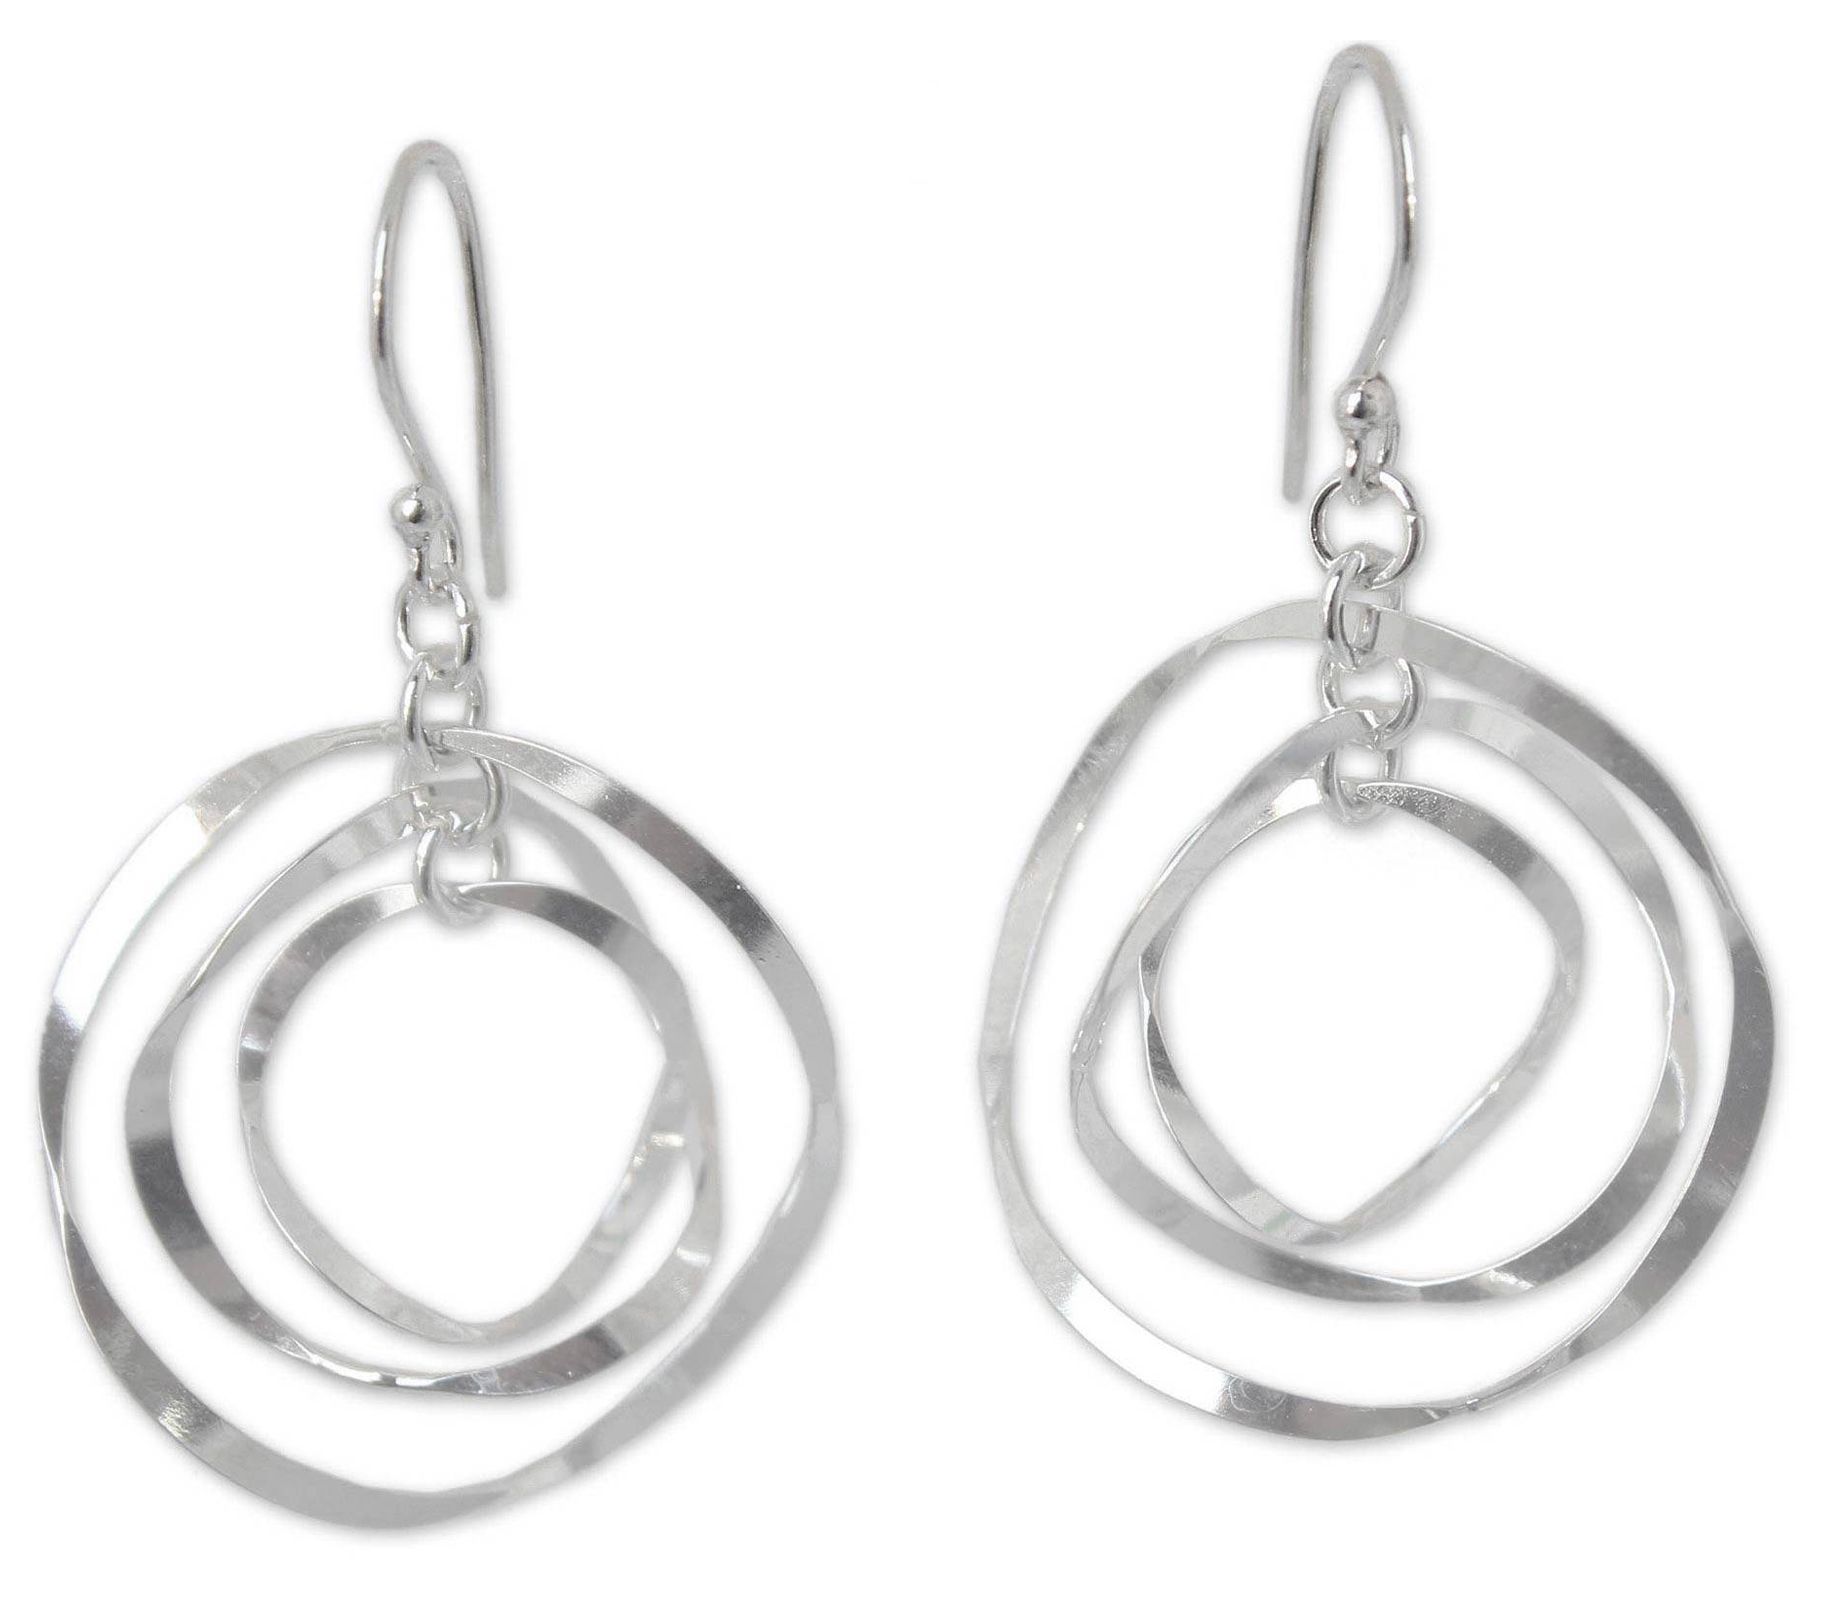 Novica Artisan Crafted Sterling Dangle Earrings - QVC.com